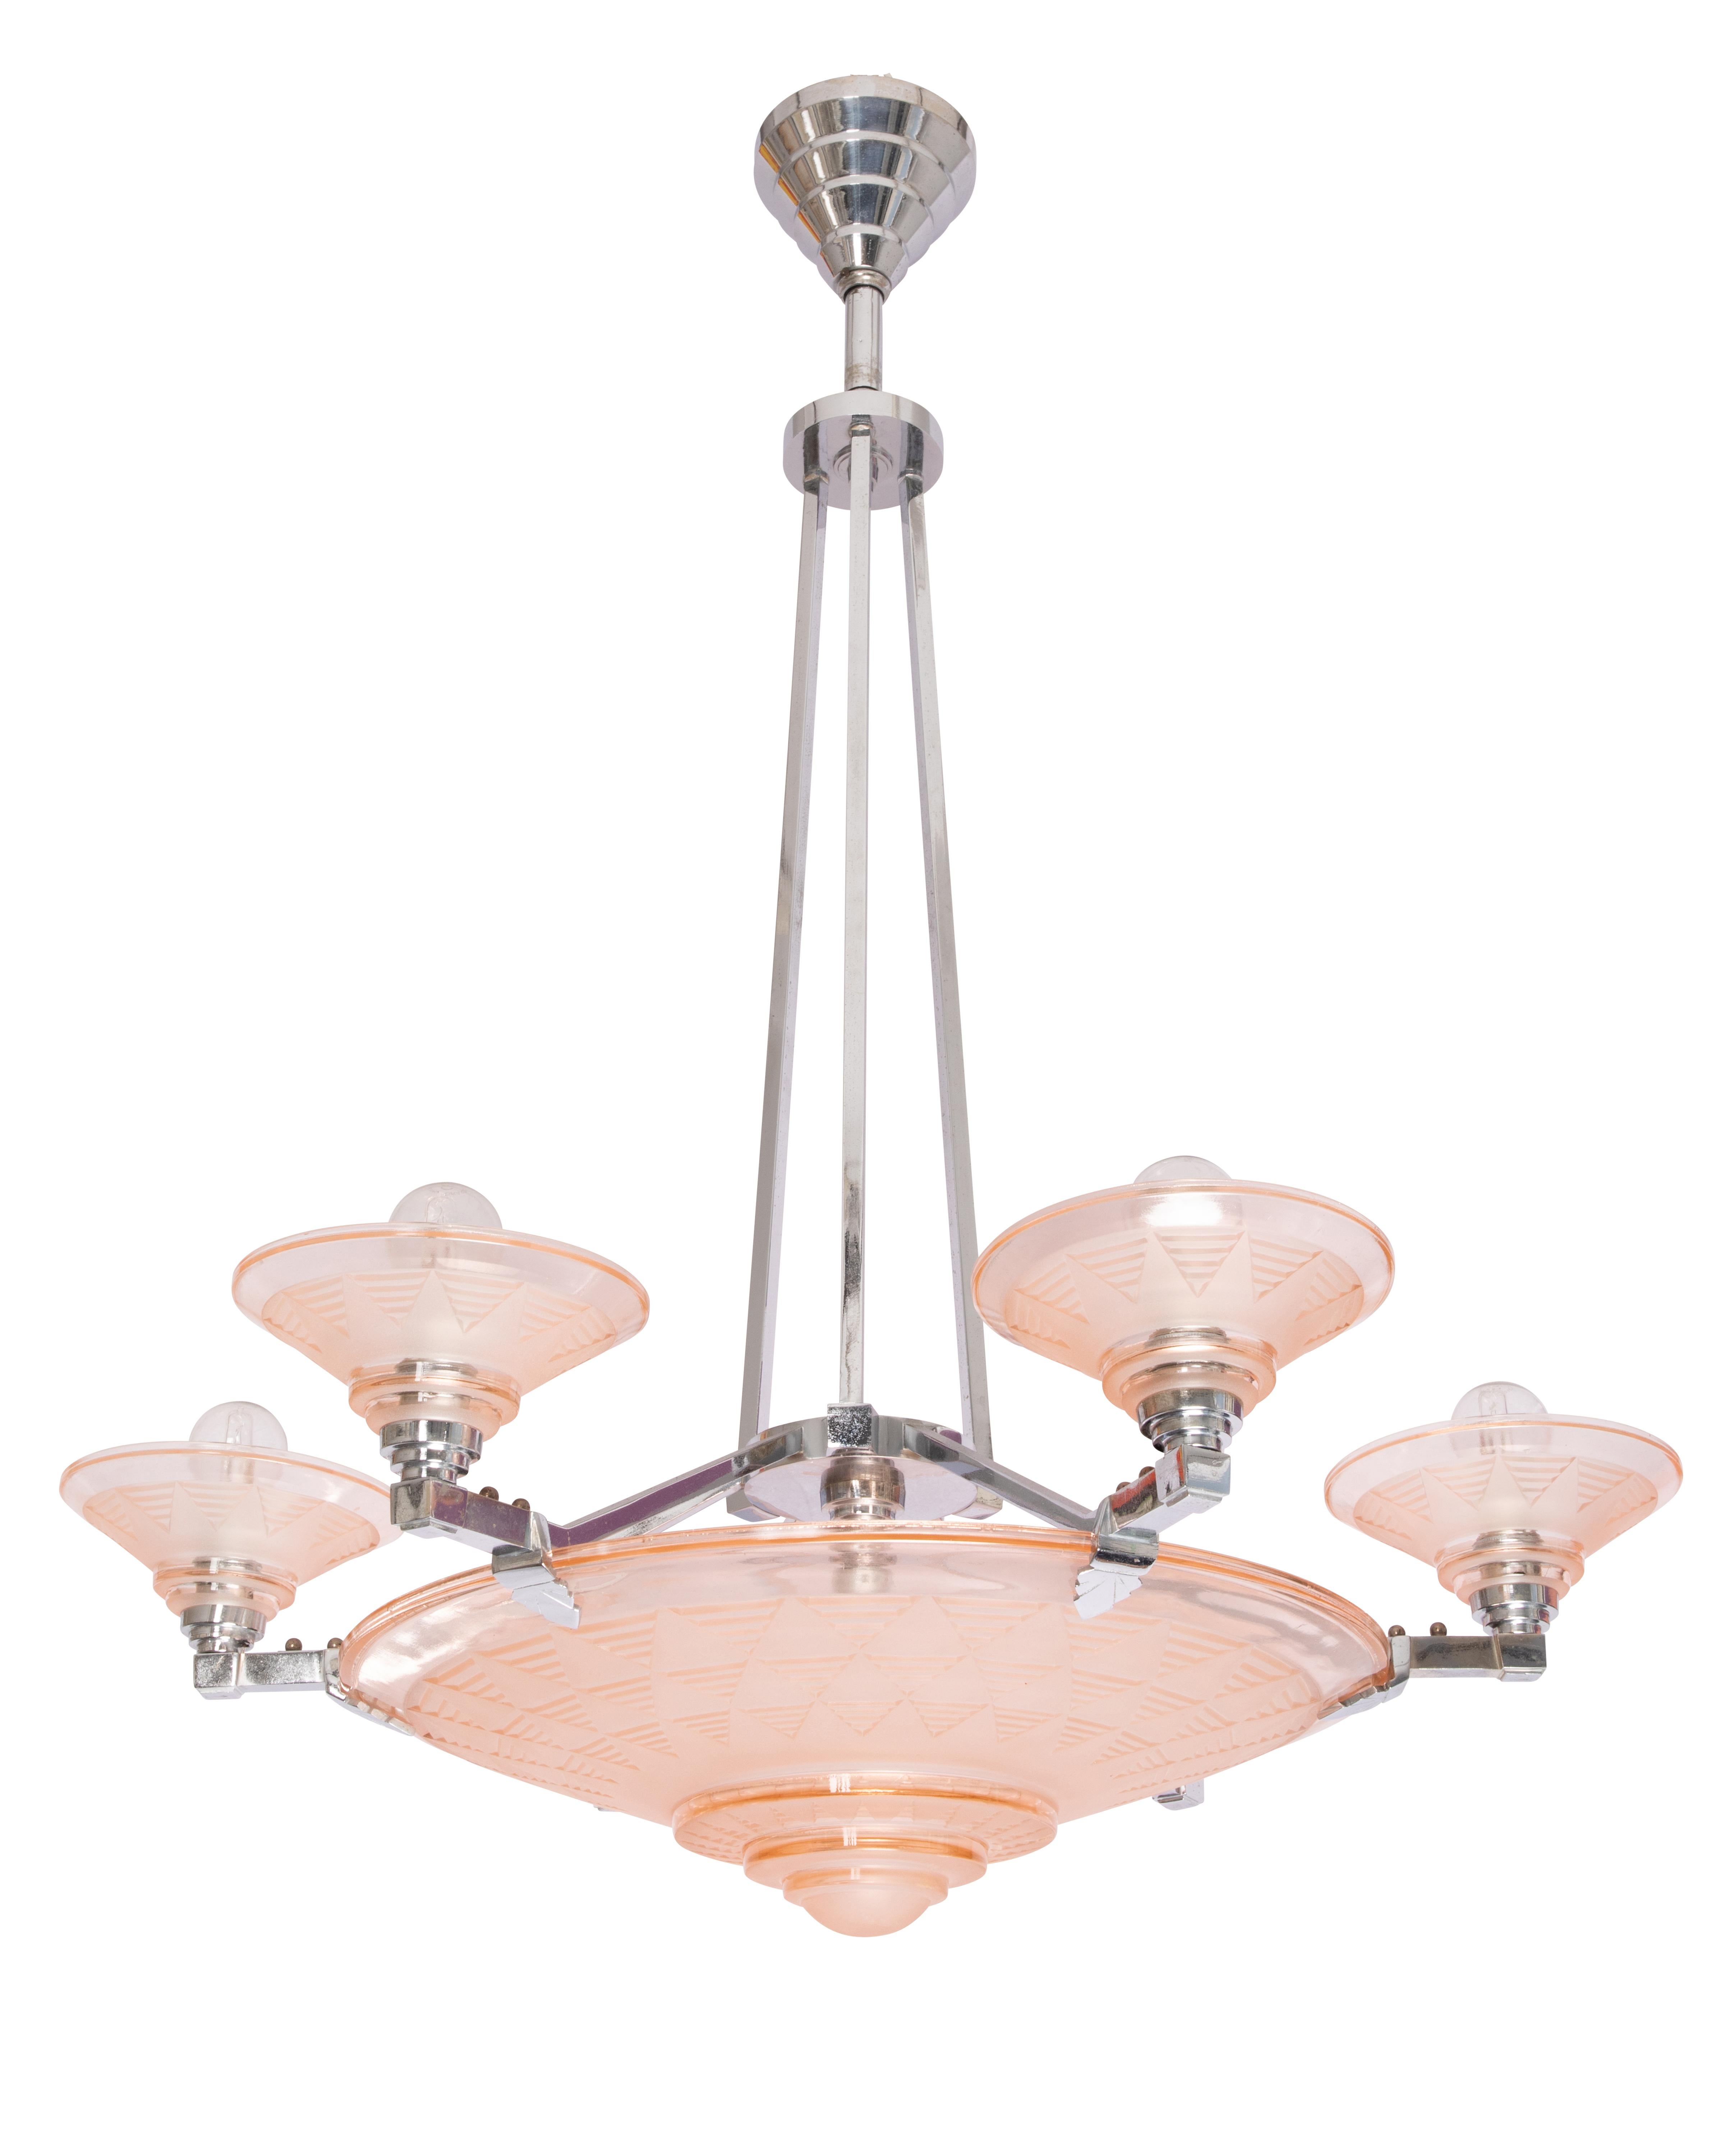 French Petitot, Circular Art Deco Chandelier, Nickelled Bronze Pink Frosted Glass, 1930 For Sale